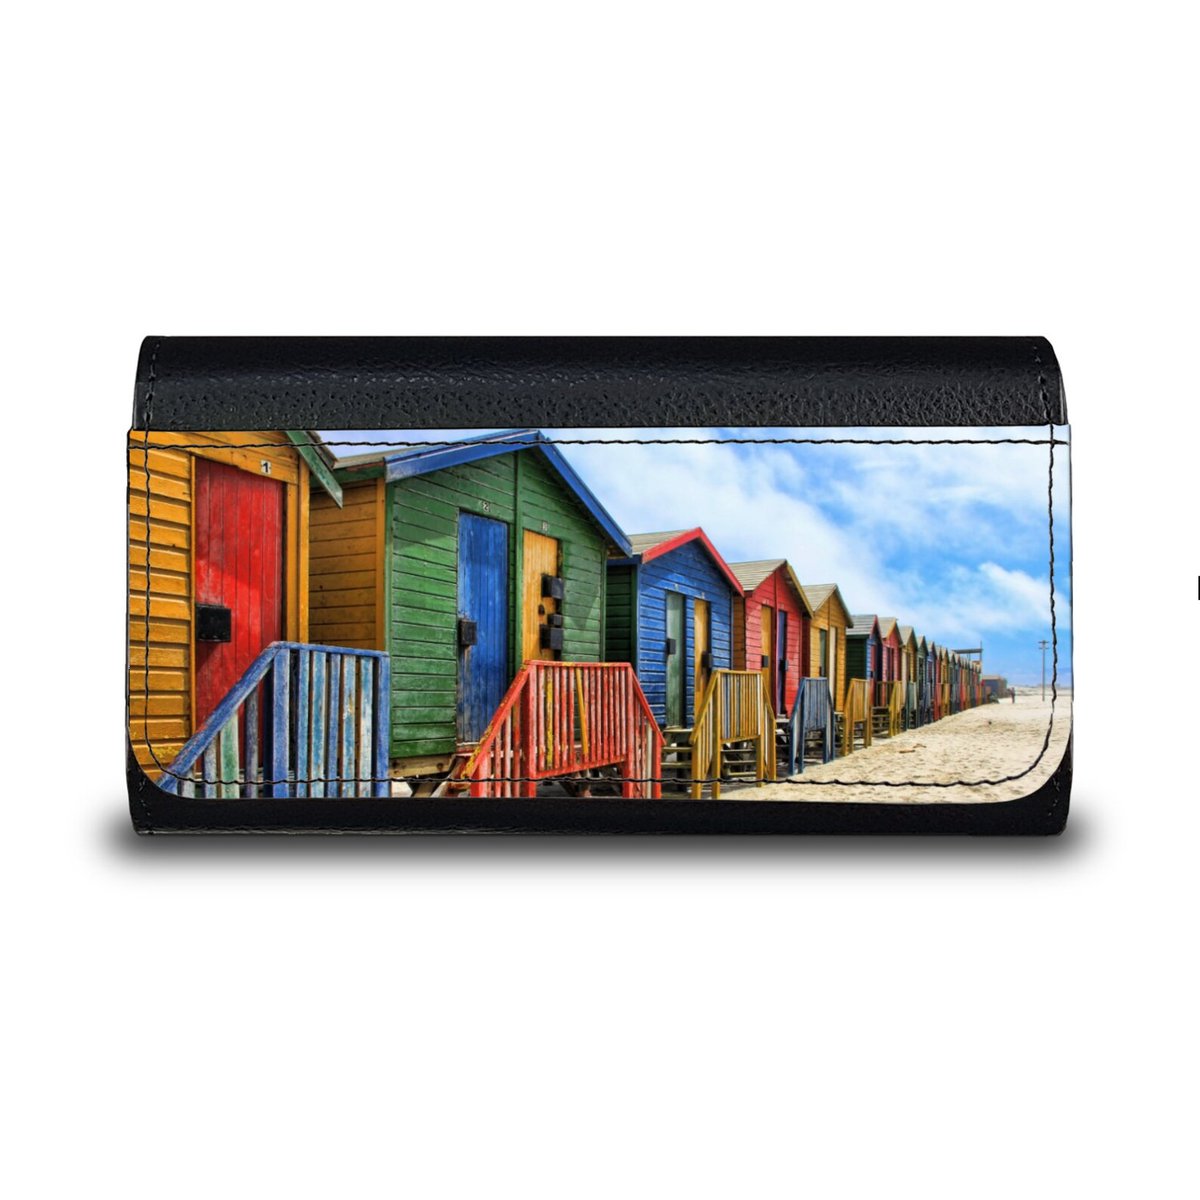 I've just added another sunglasses case ready to order... this time featuring old-style beach huts. I love the colours so much. You can see it here: toteallyvintage.etsy.com/listing/168638…

#mhhsbd #BeachVibes #SummerOf24 #etsygifts #veganleather #SummerVibes